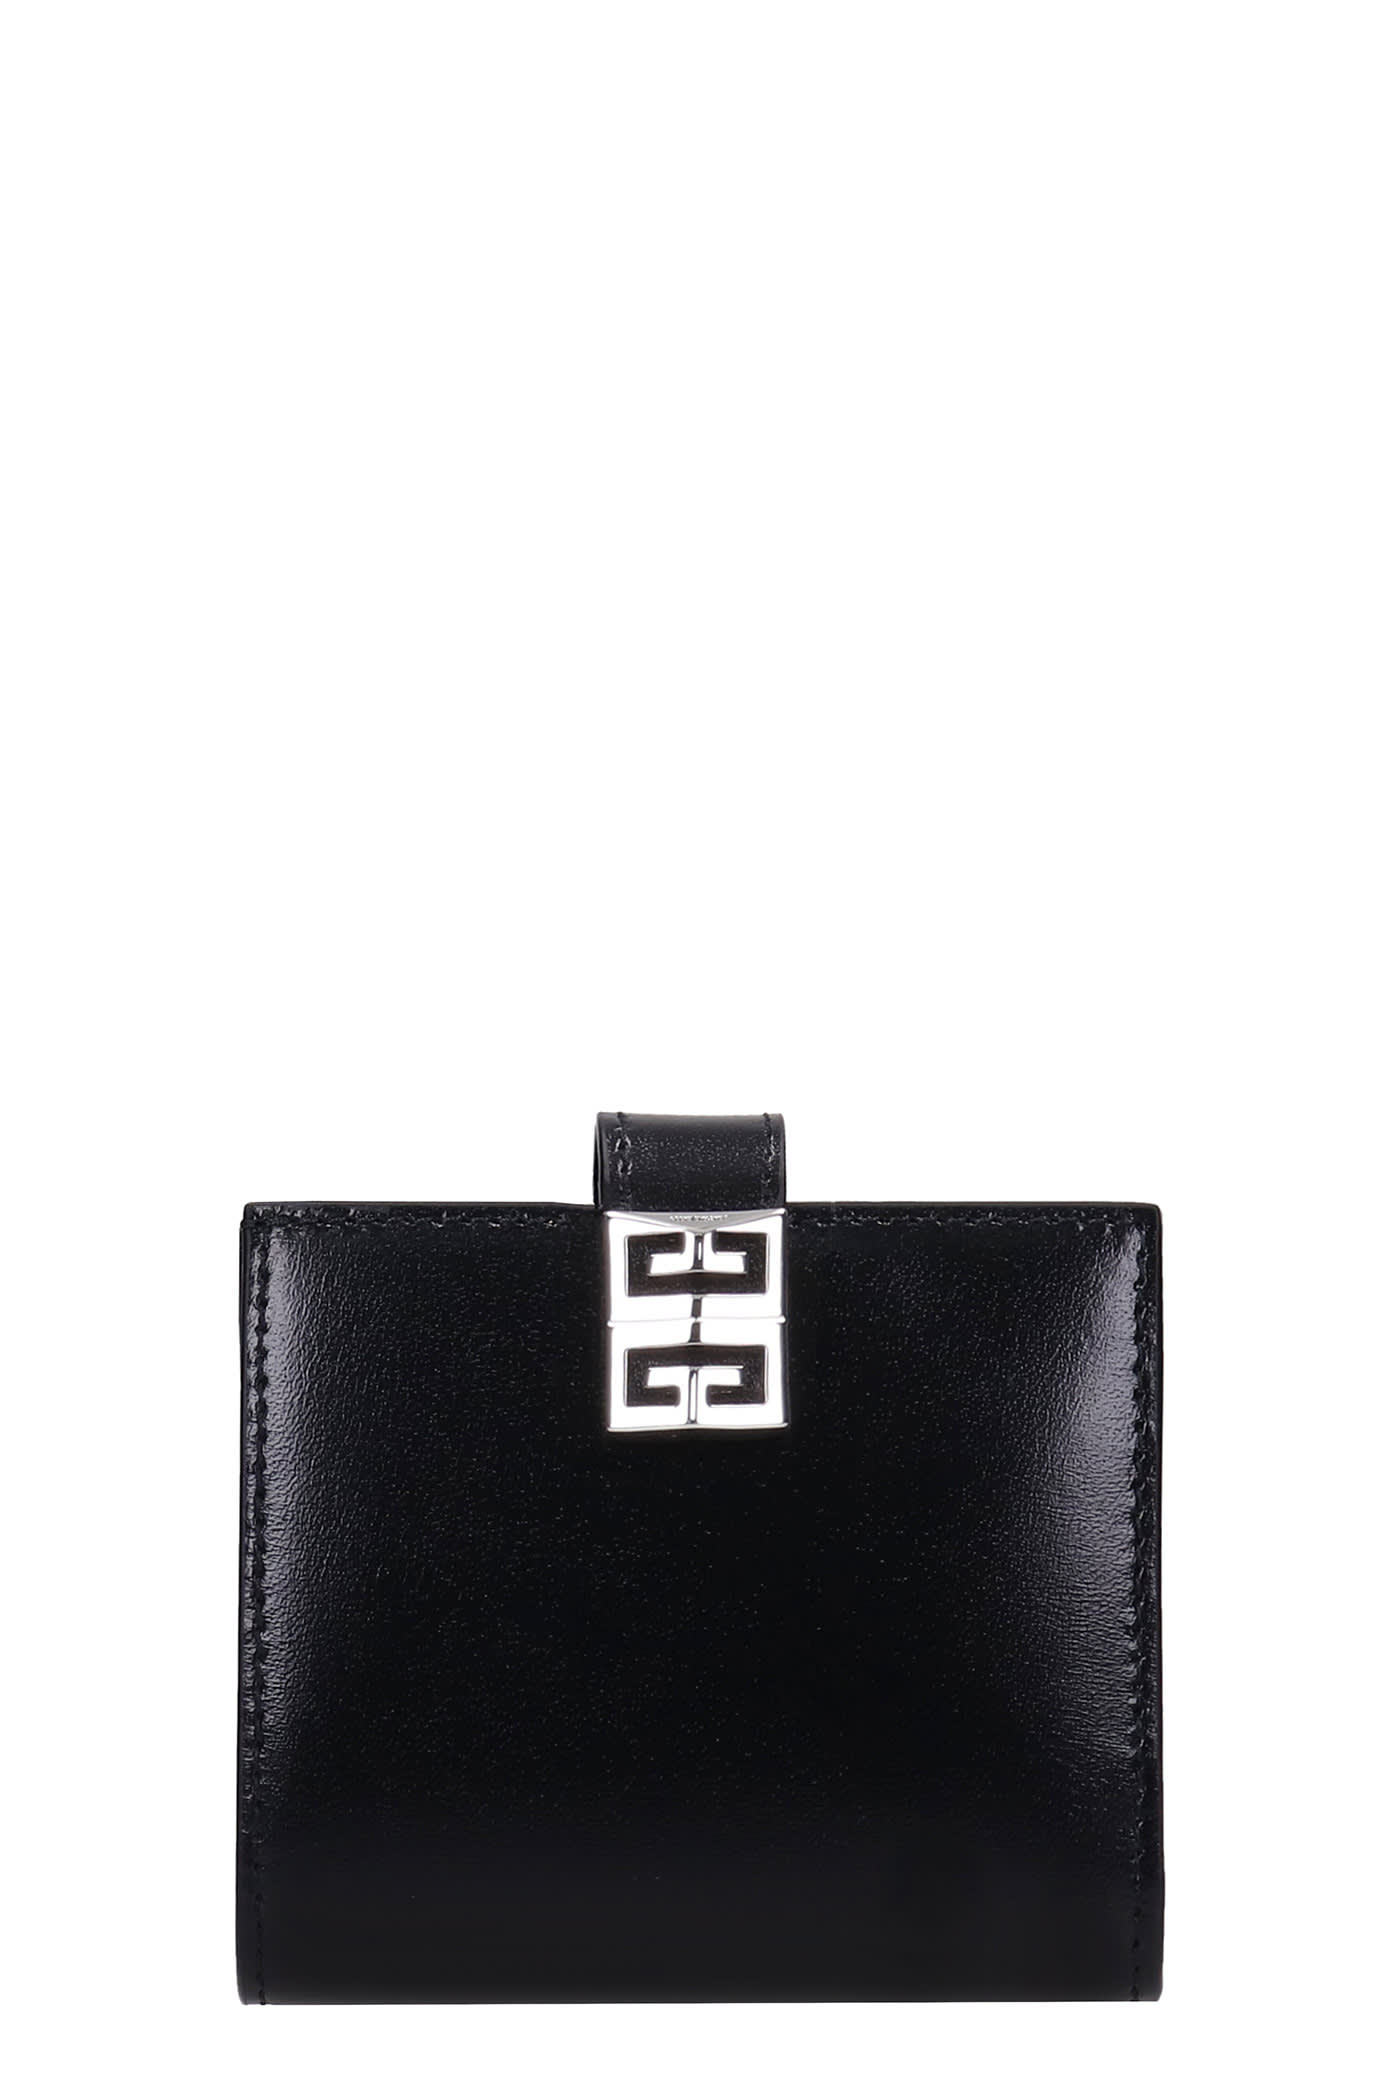 Givenchy 4g Clutch In Black Leather